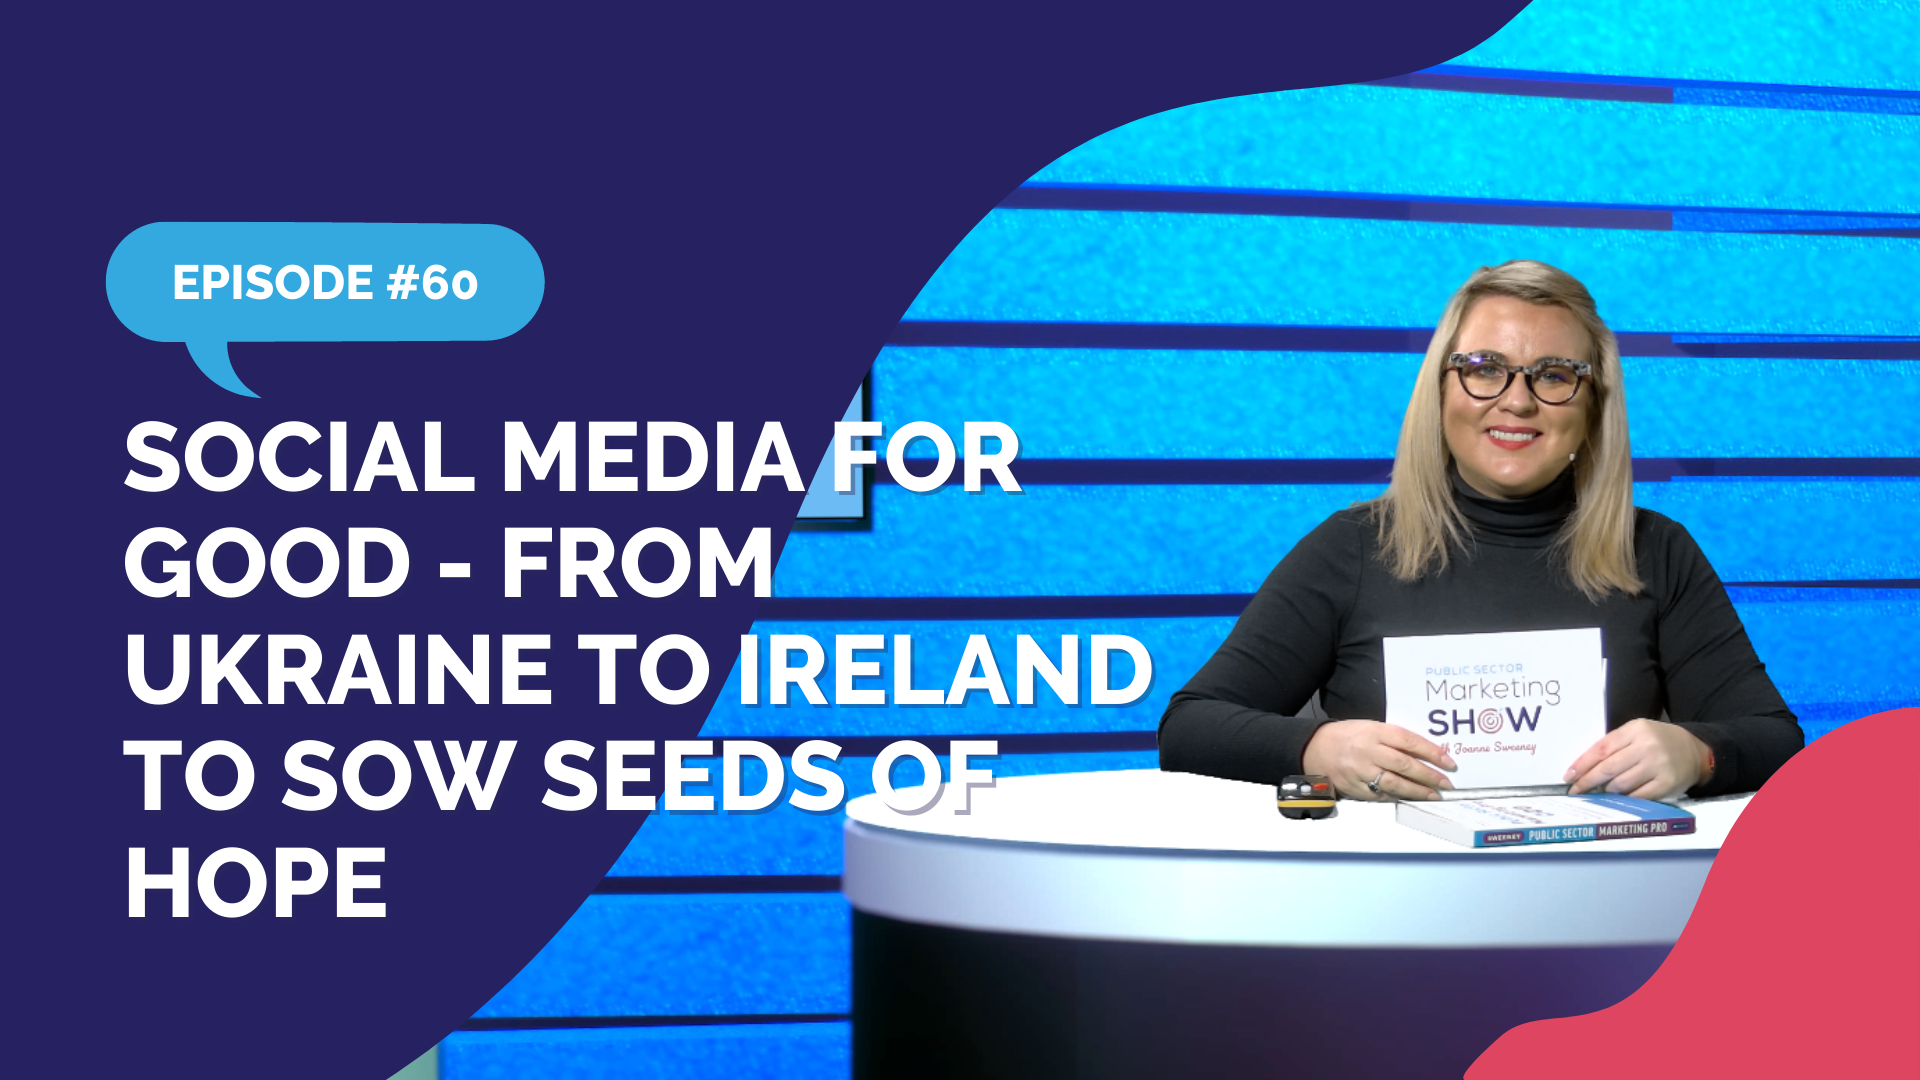 Episode 60 - Social Media for Good - From Ukraine to Ireland to Sow Seeds of Hope